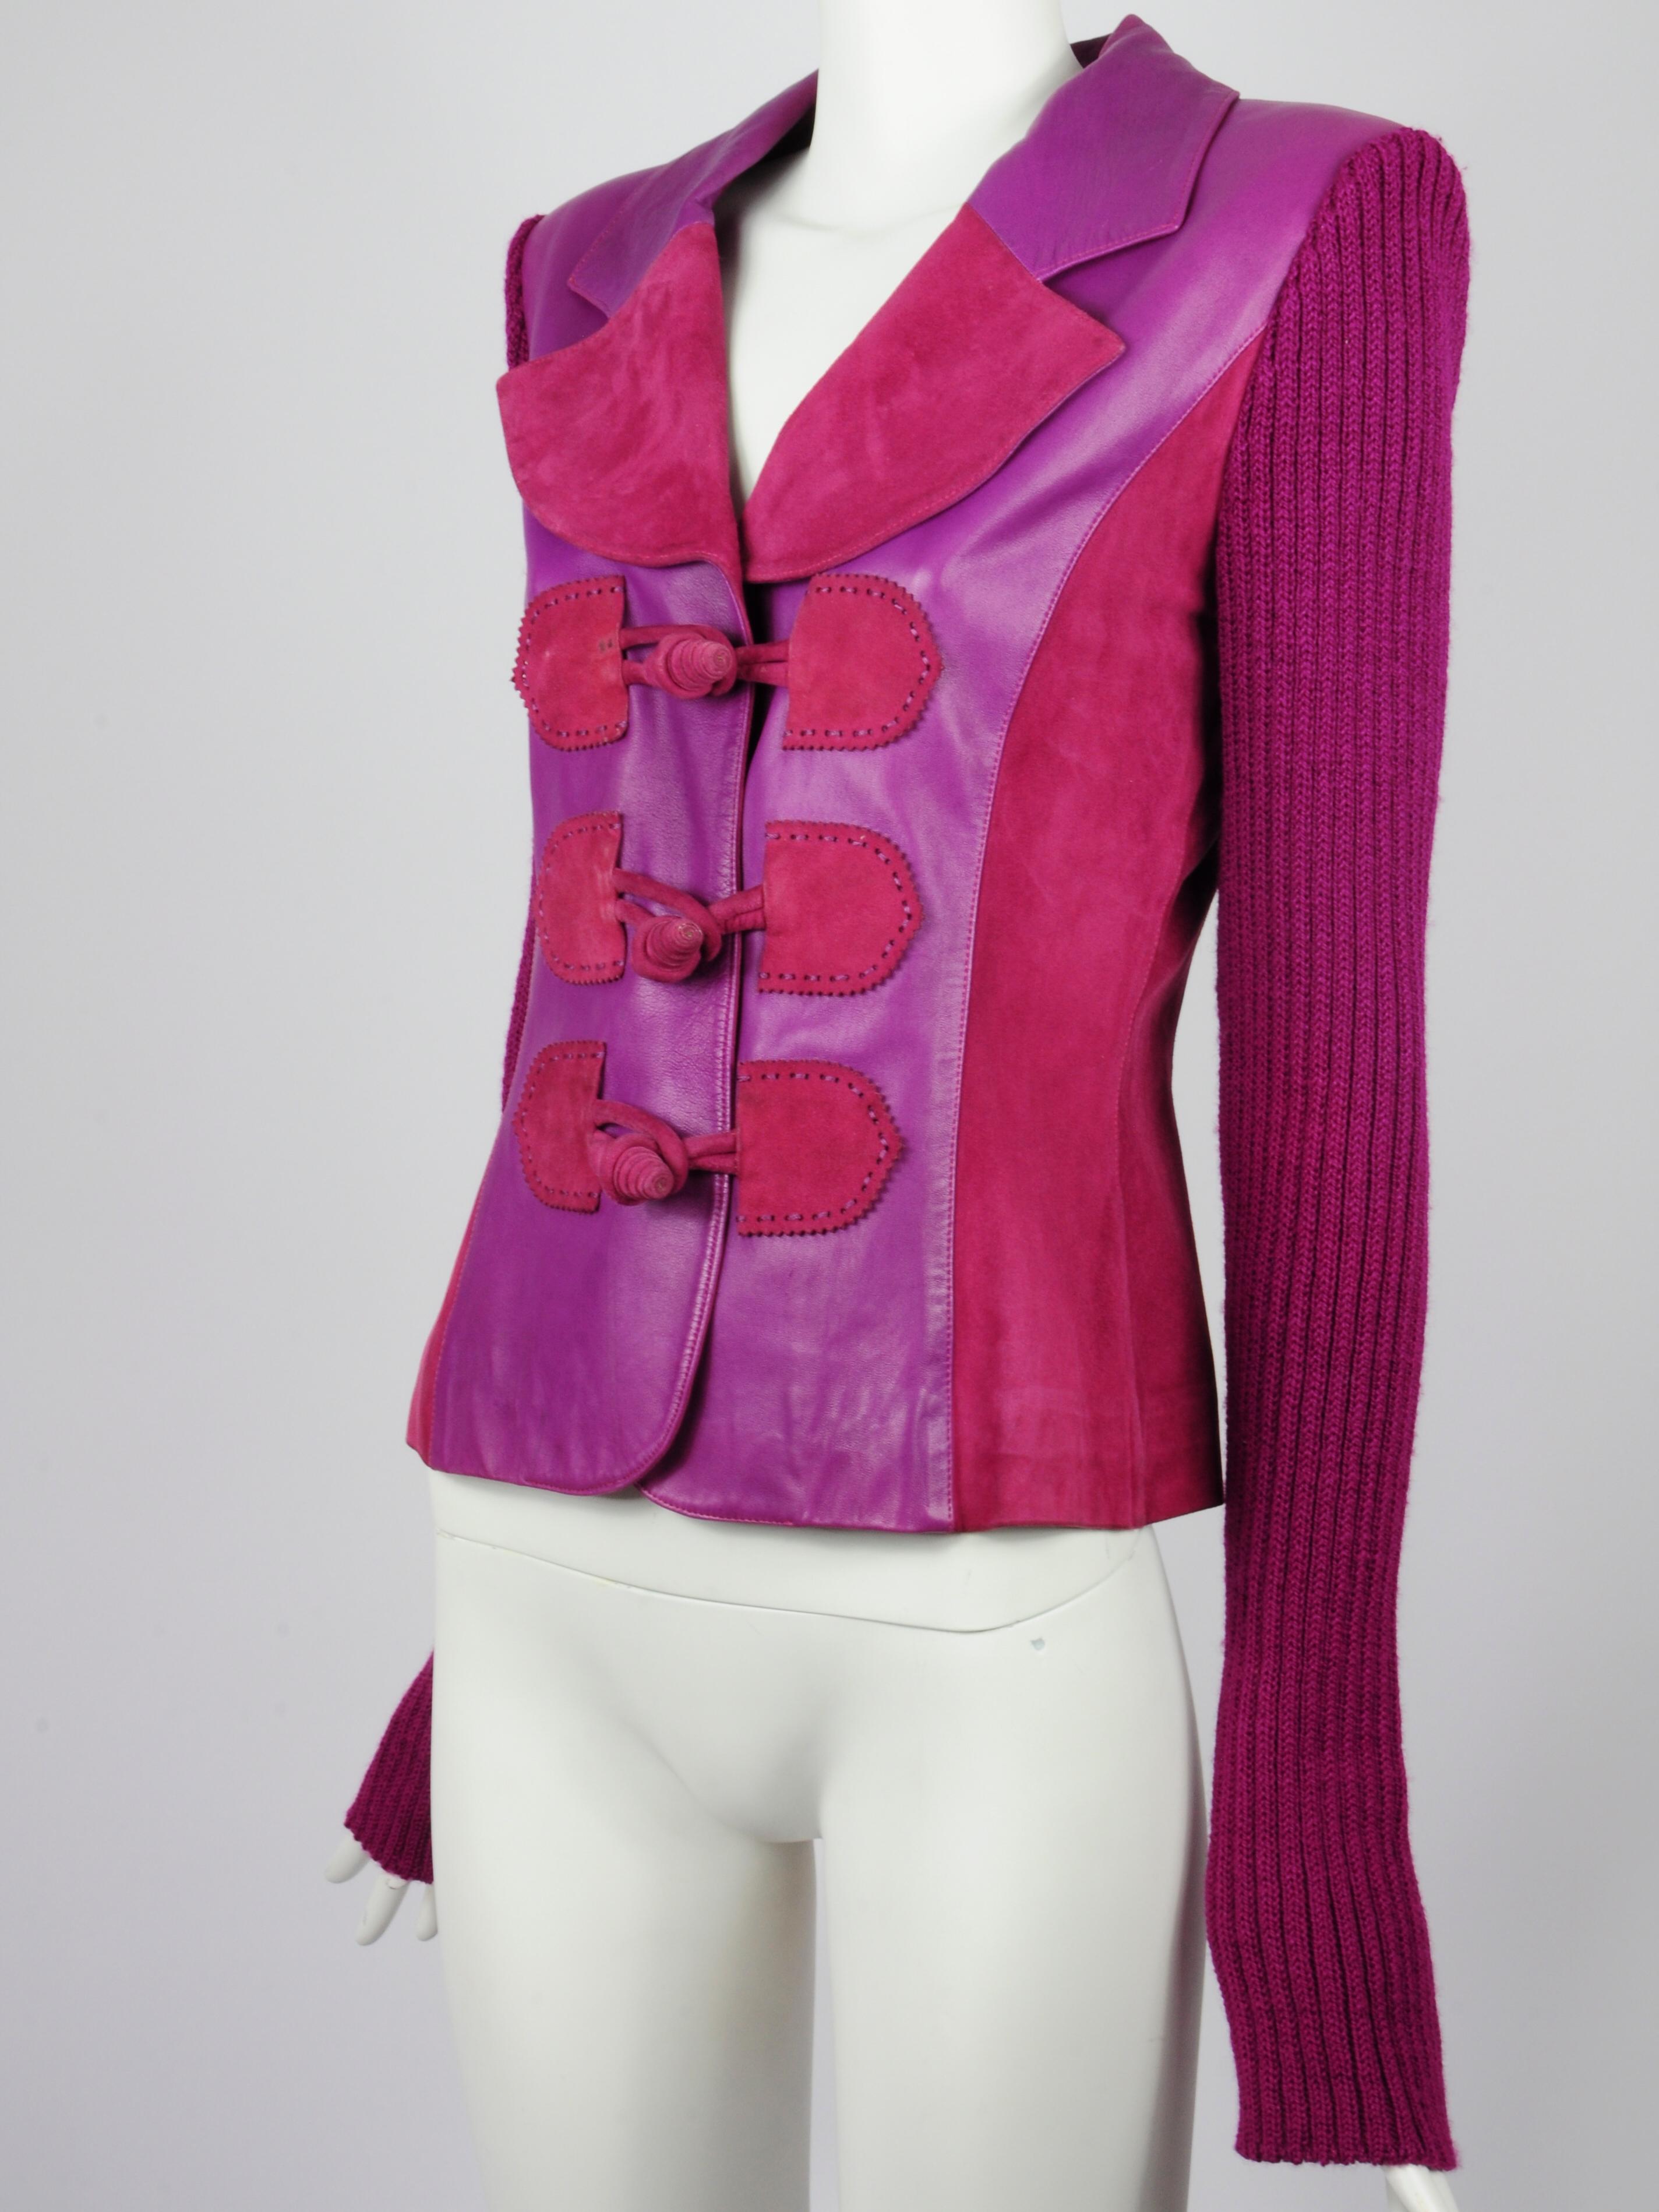 Elizabeth Wessel Monte Carlo Leather and Knitwear Purple Blazer 1980s In Good Condition For Sale In AMSTERDAM, NL